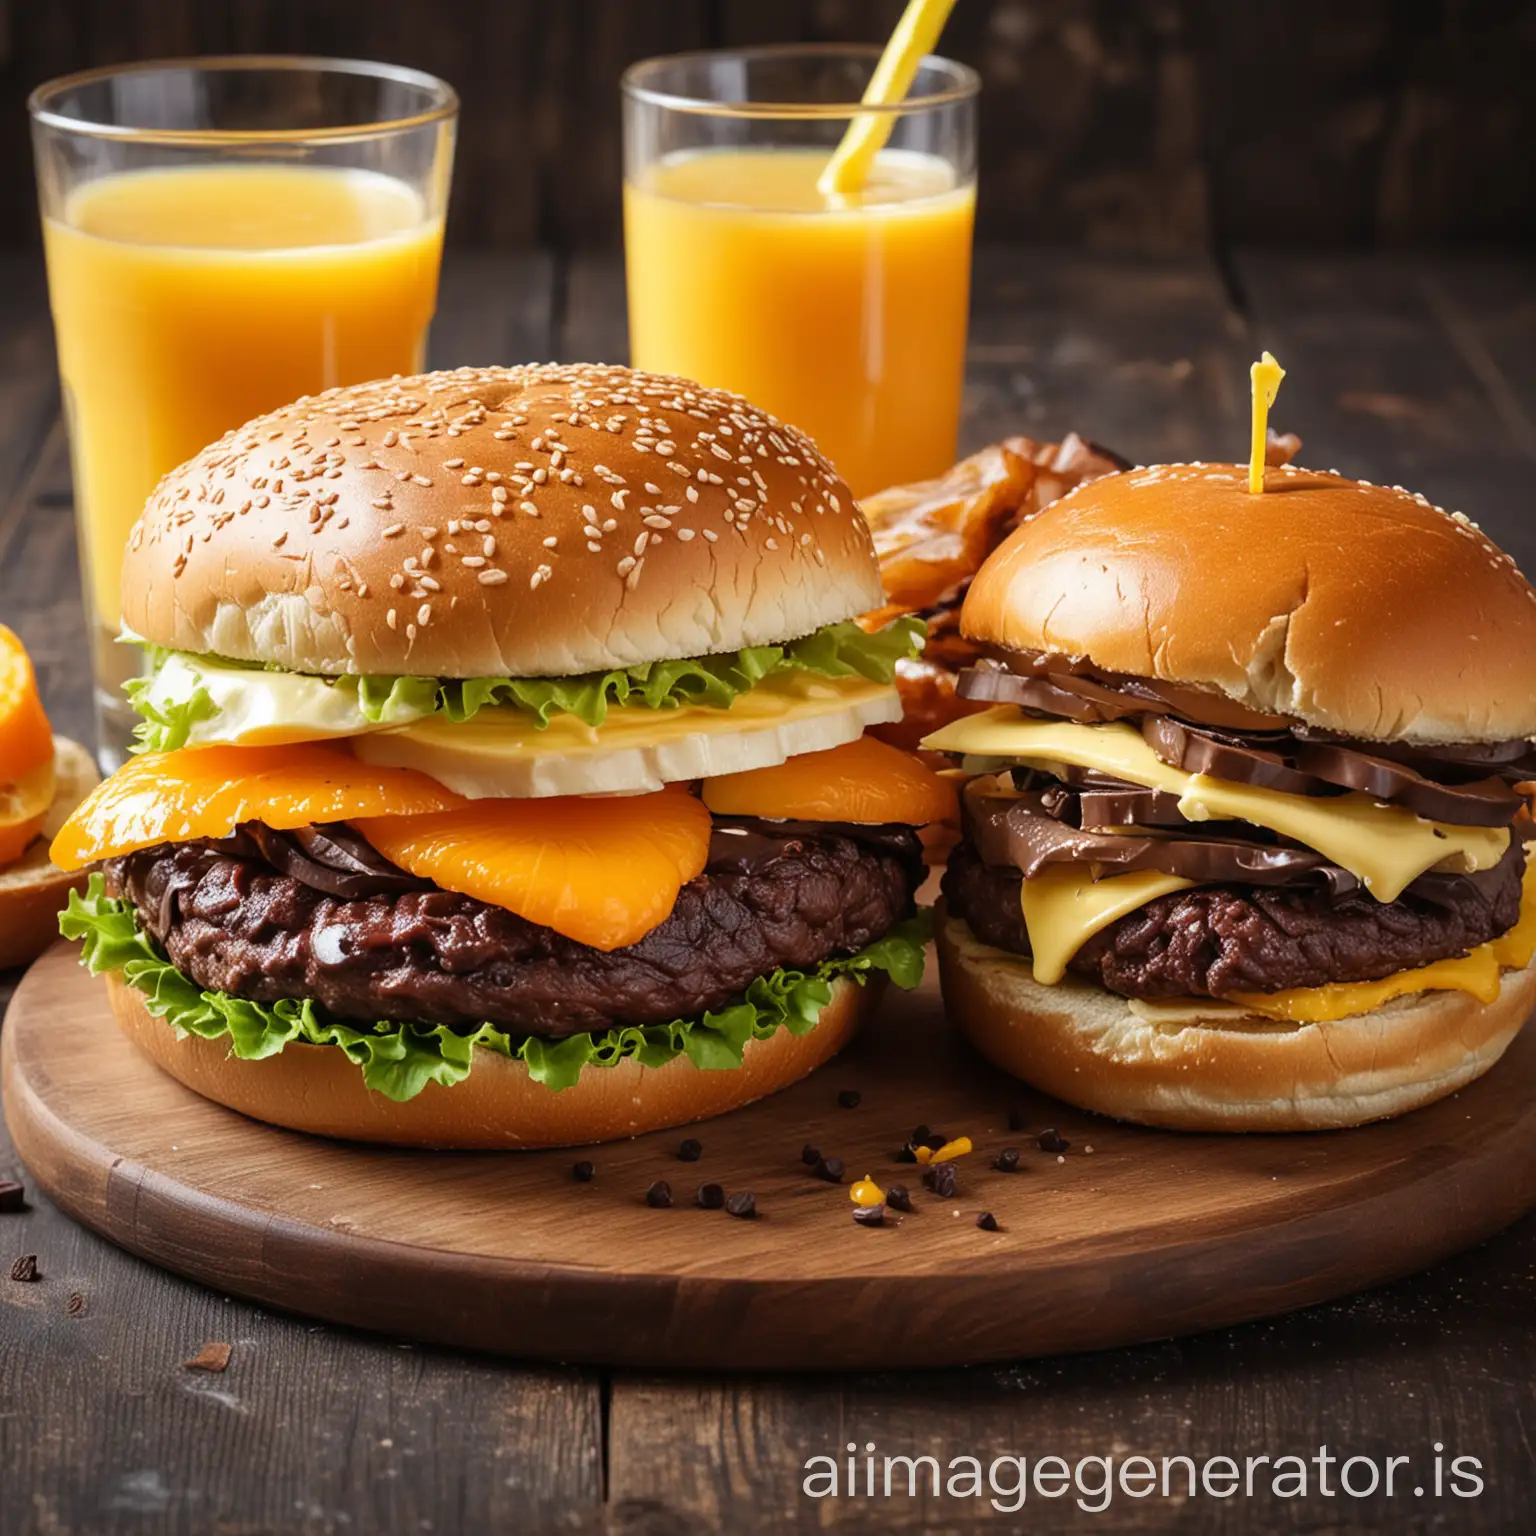 delicious sandwitch and hamburger, with chocolate and butter, orange juice